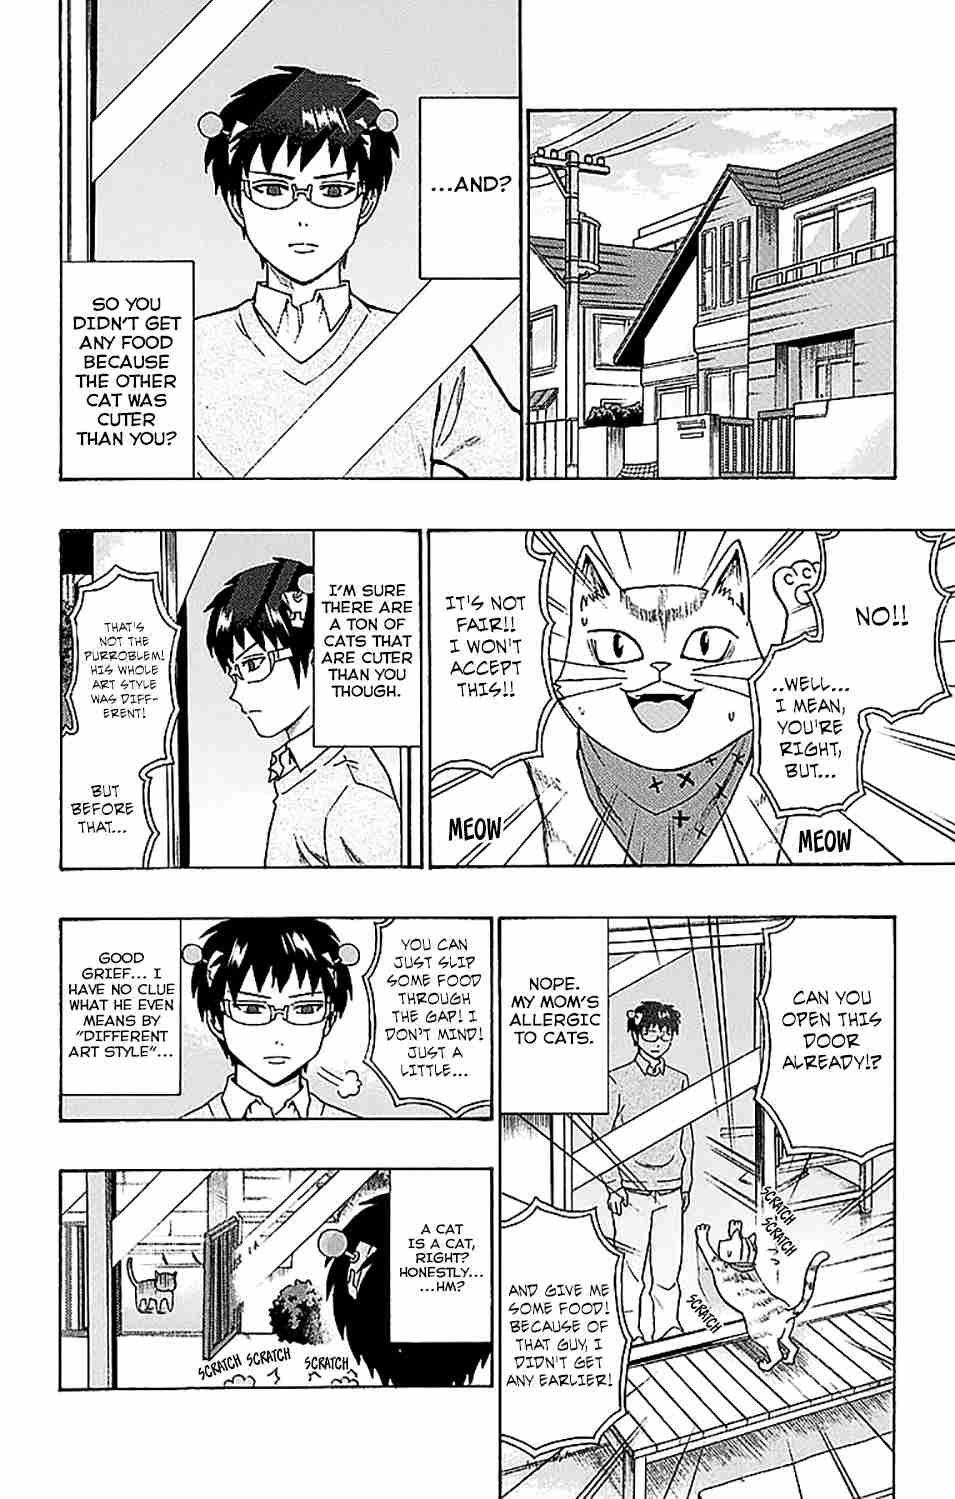 Saiki Kusuo no PSI nan Vol. 21 Ch. 222 Let's Reinvent the MaPSIcot Character